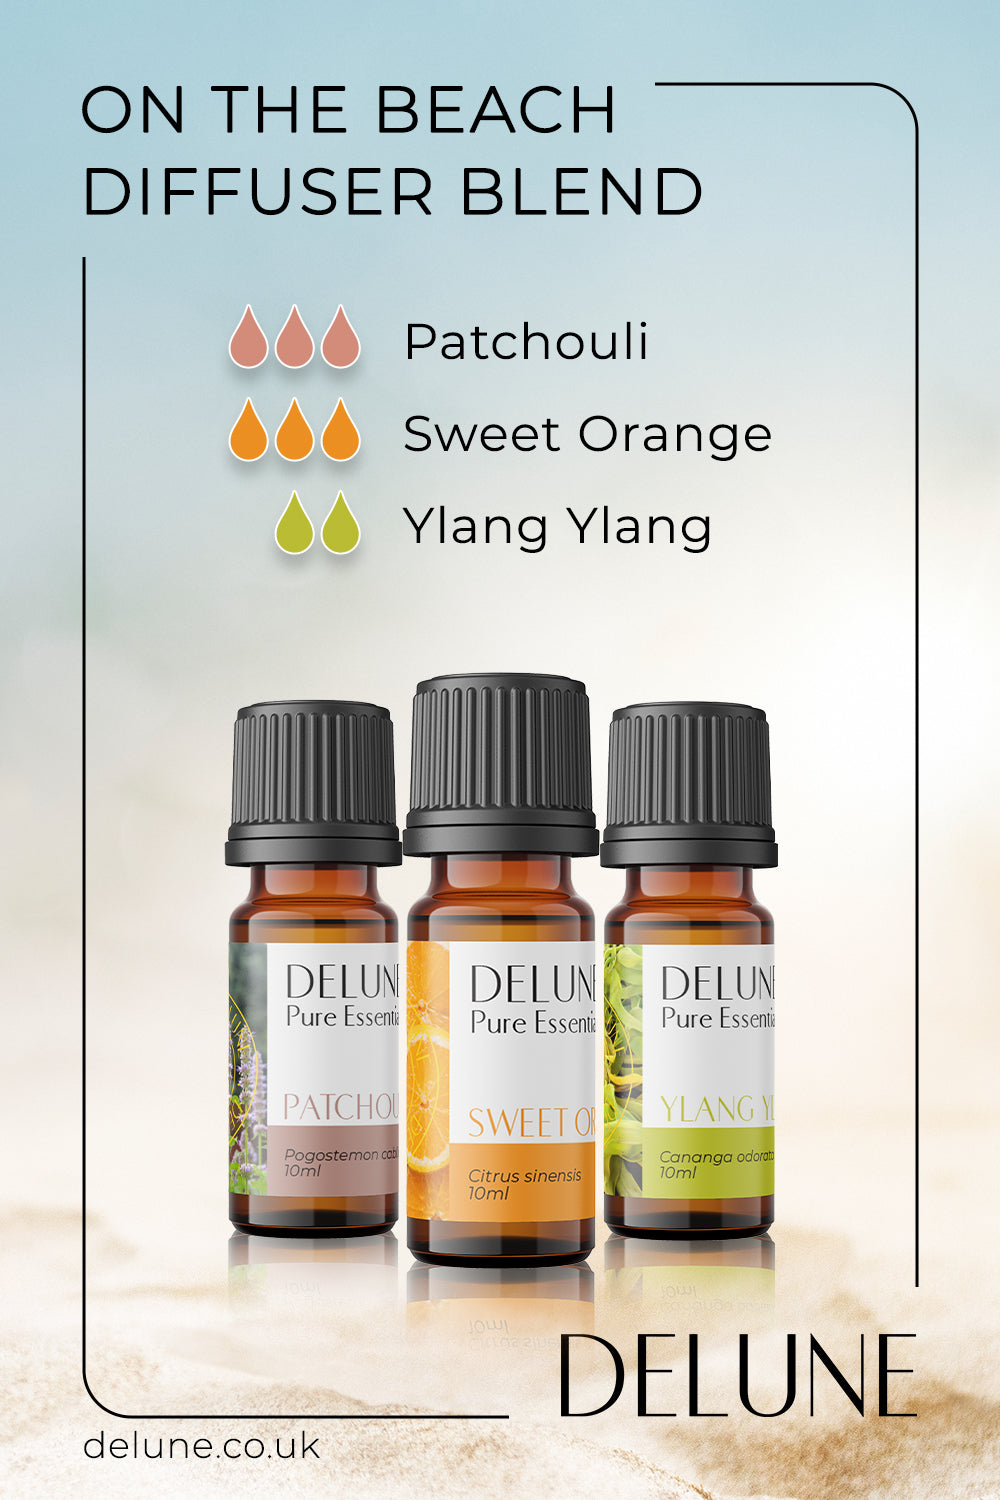 On The Beach - Diffuser Blend